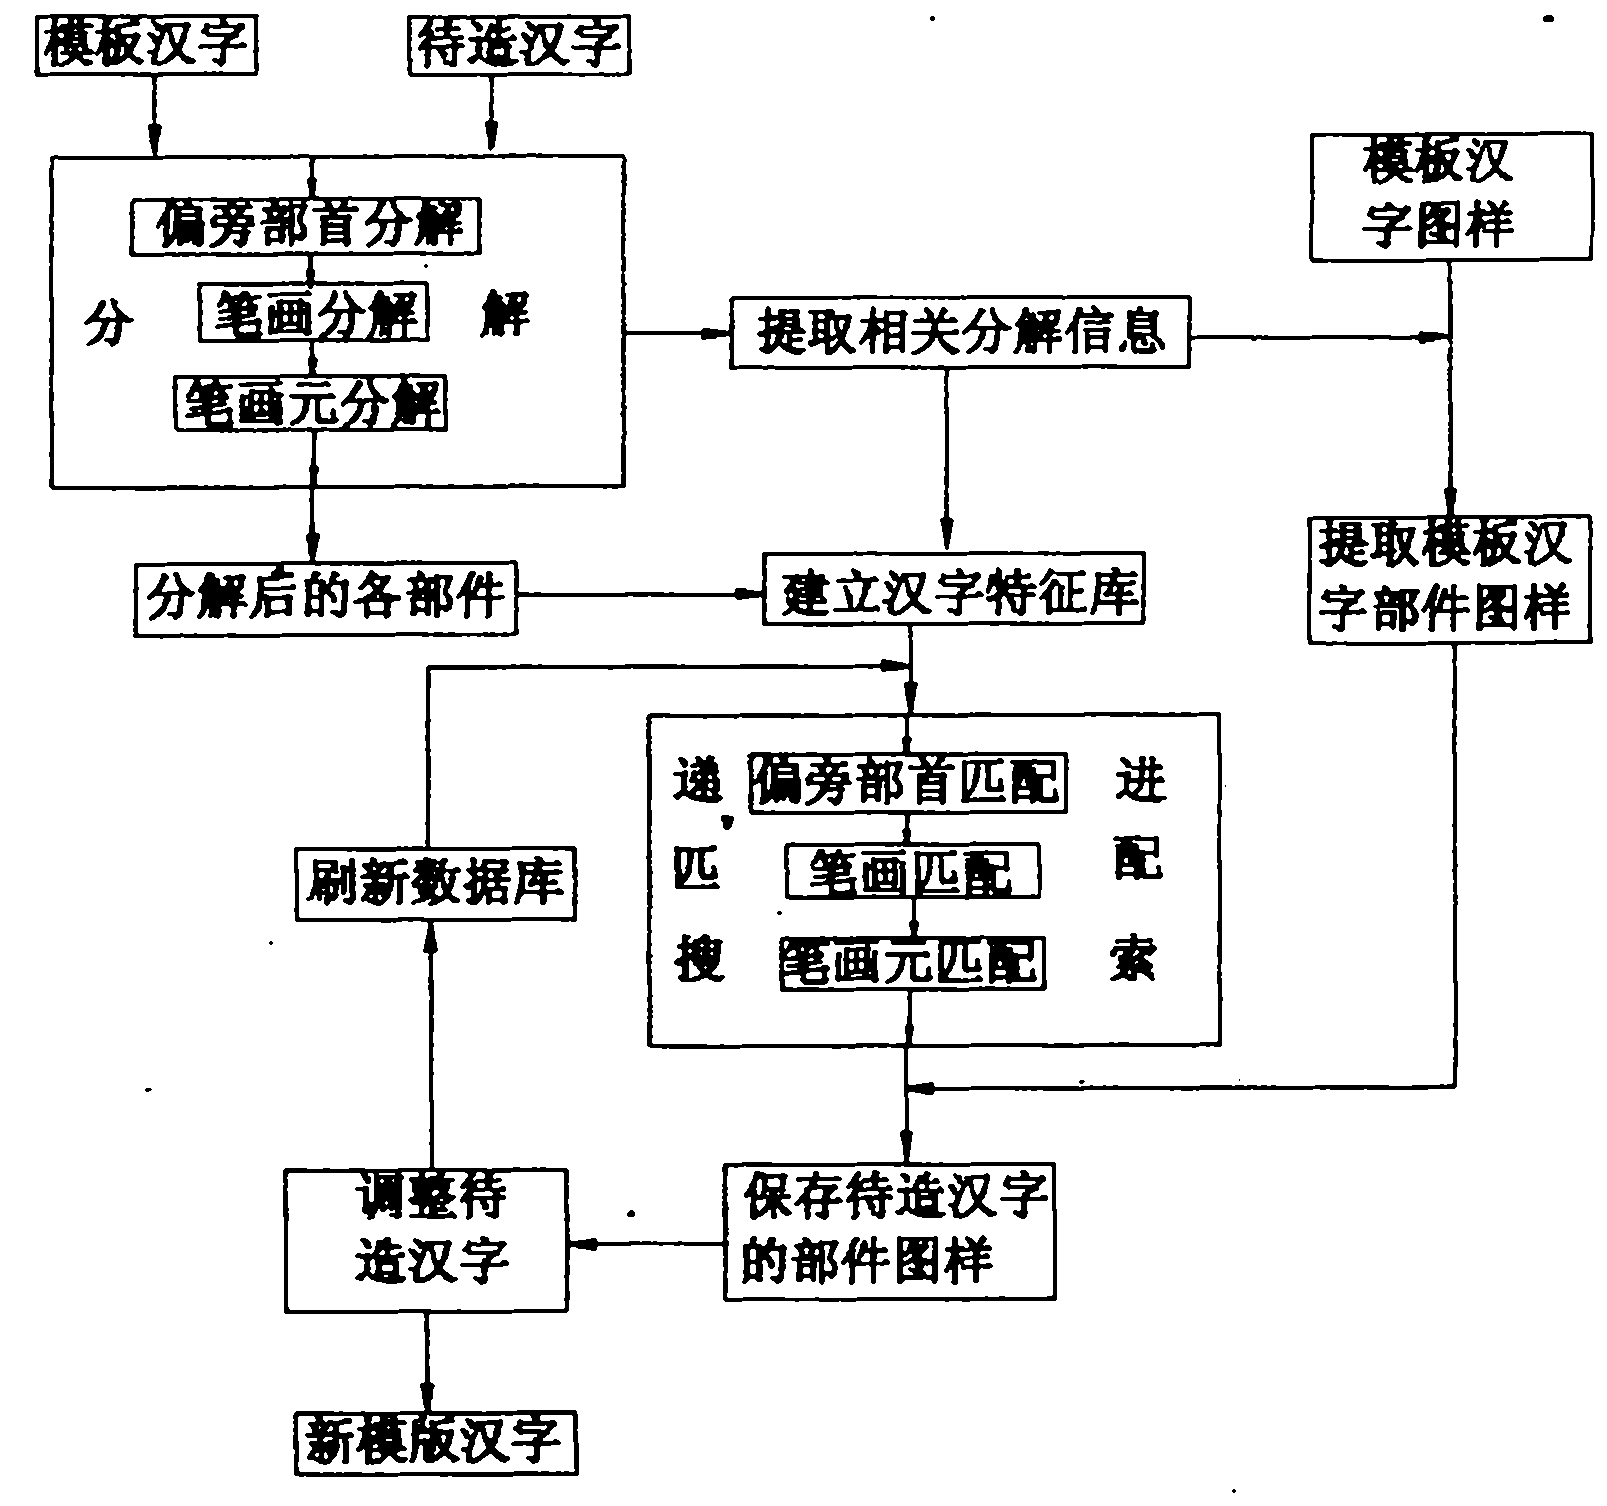 Method for reconstructing Chinese character font